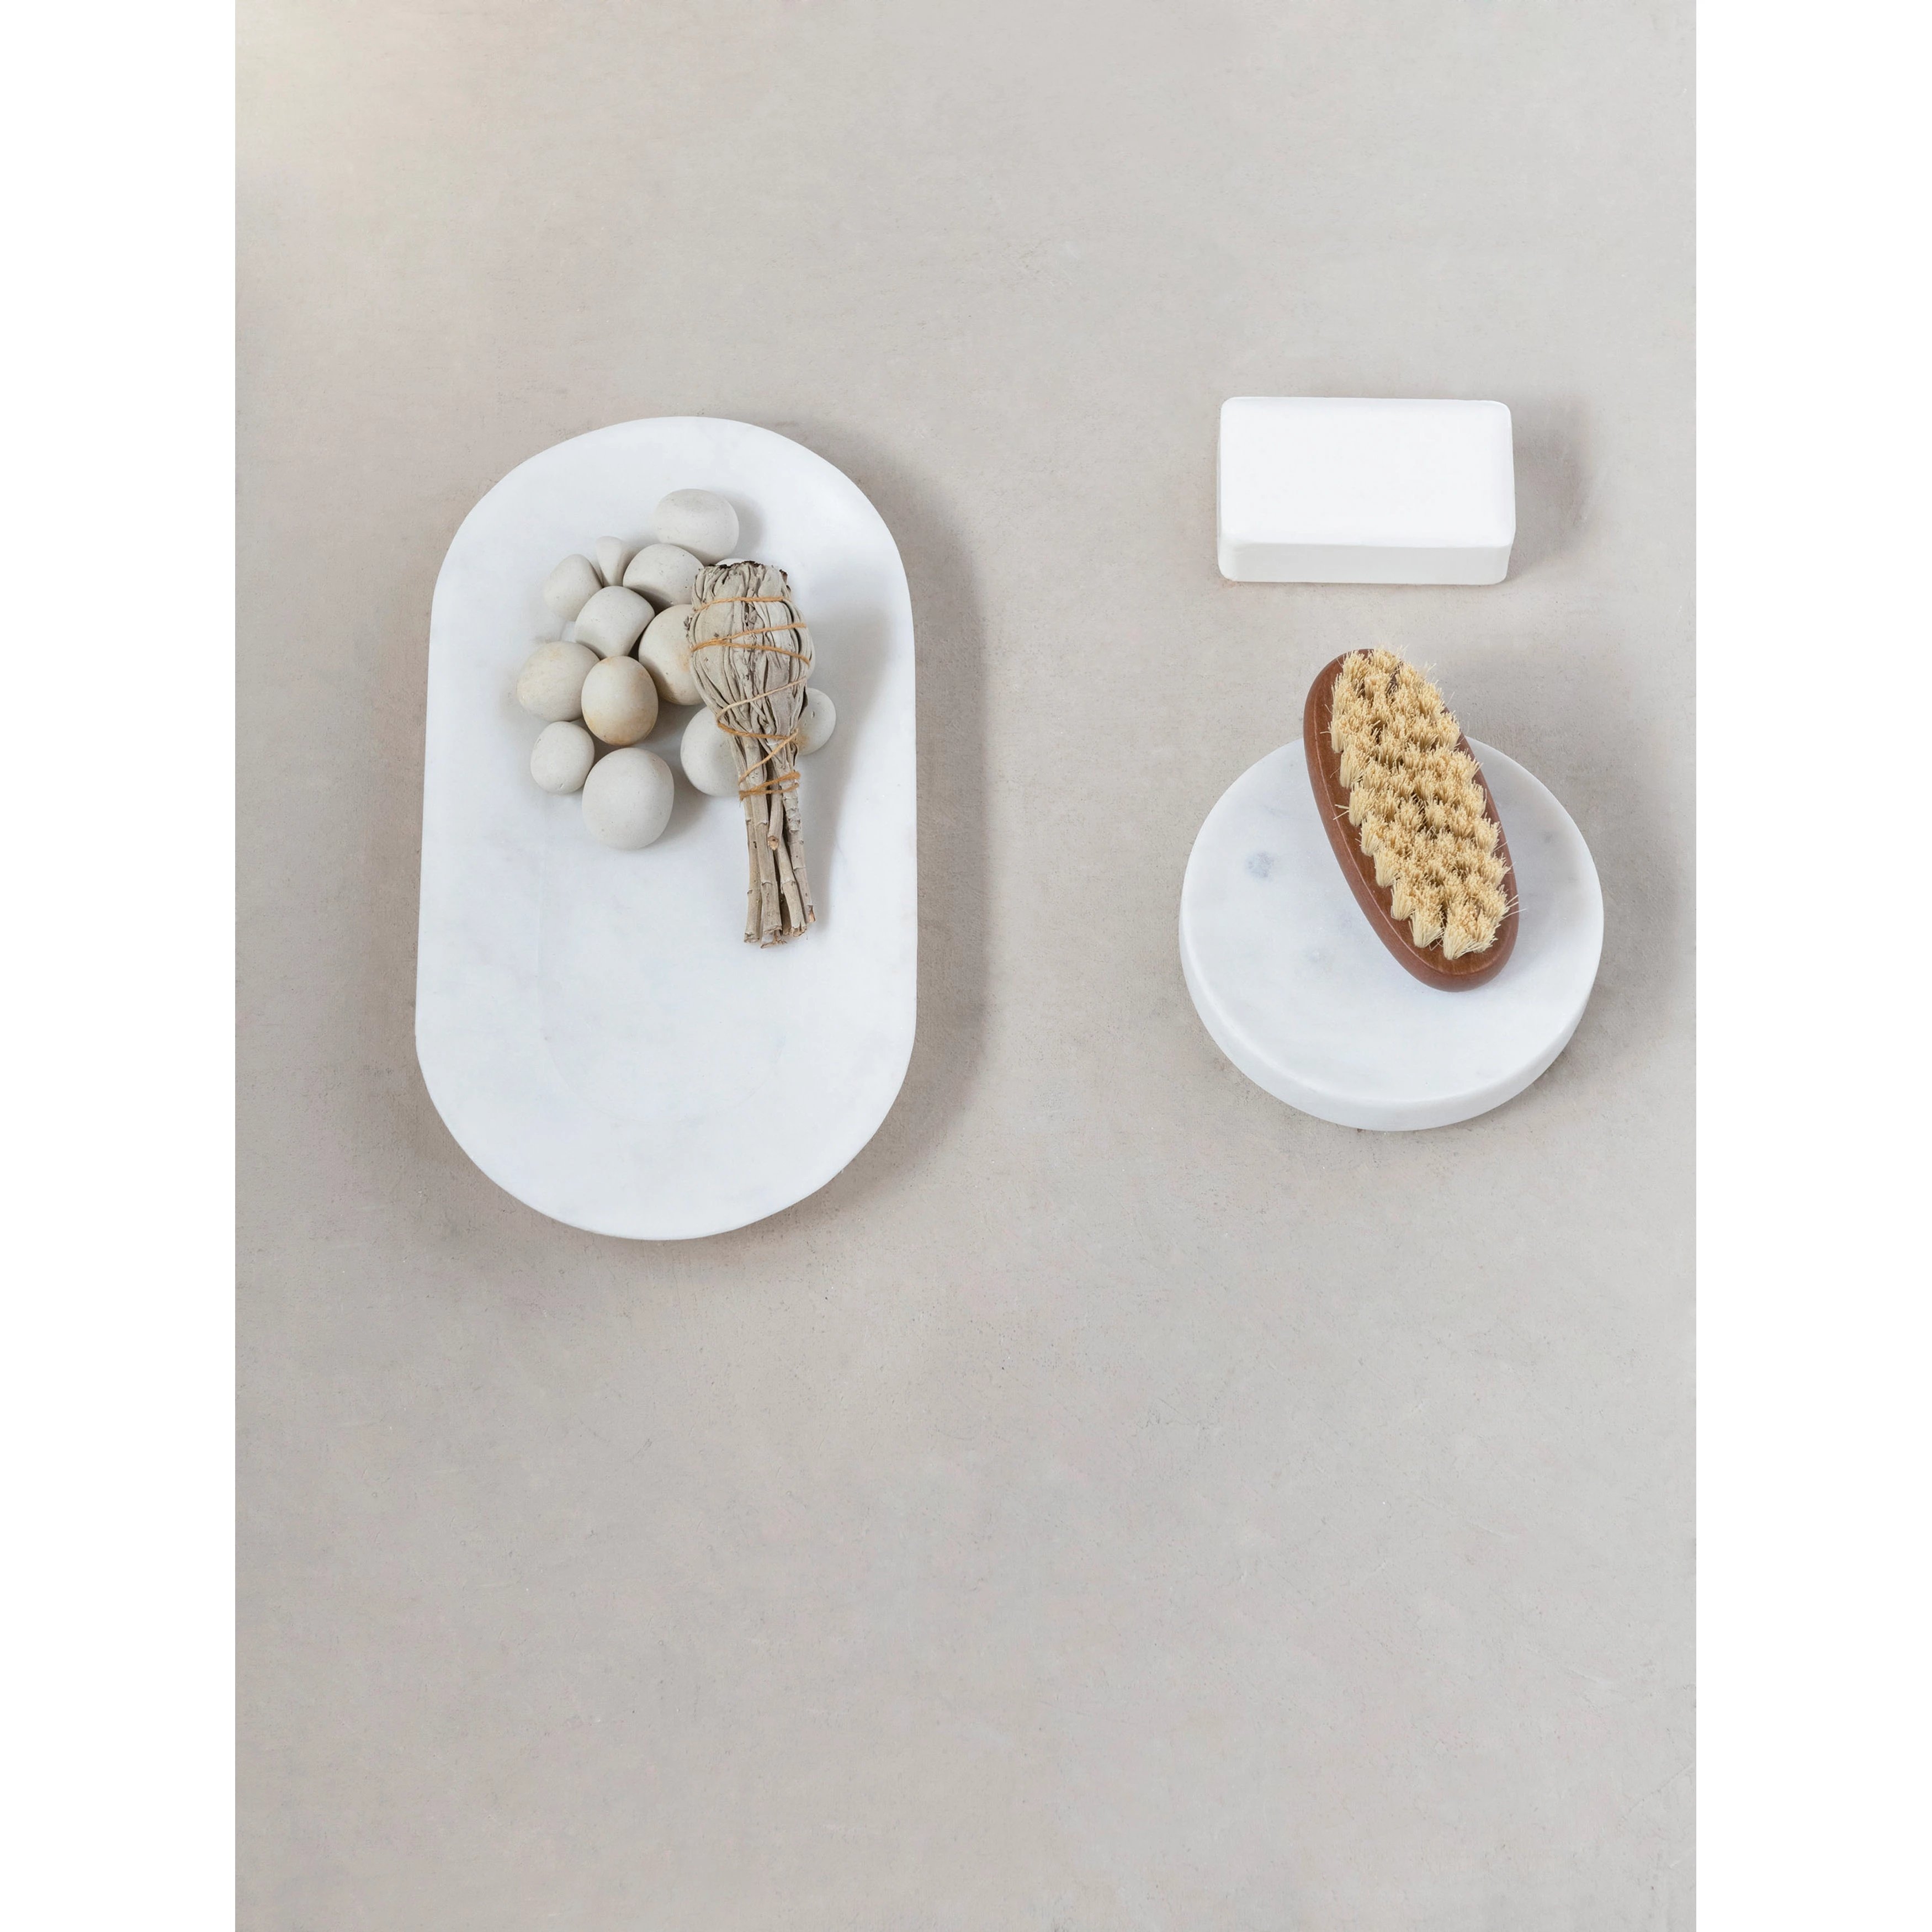 Marble Tray - Image 1